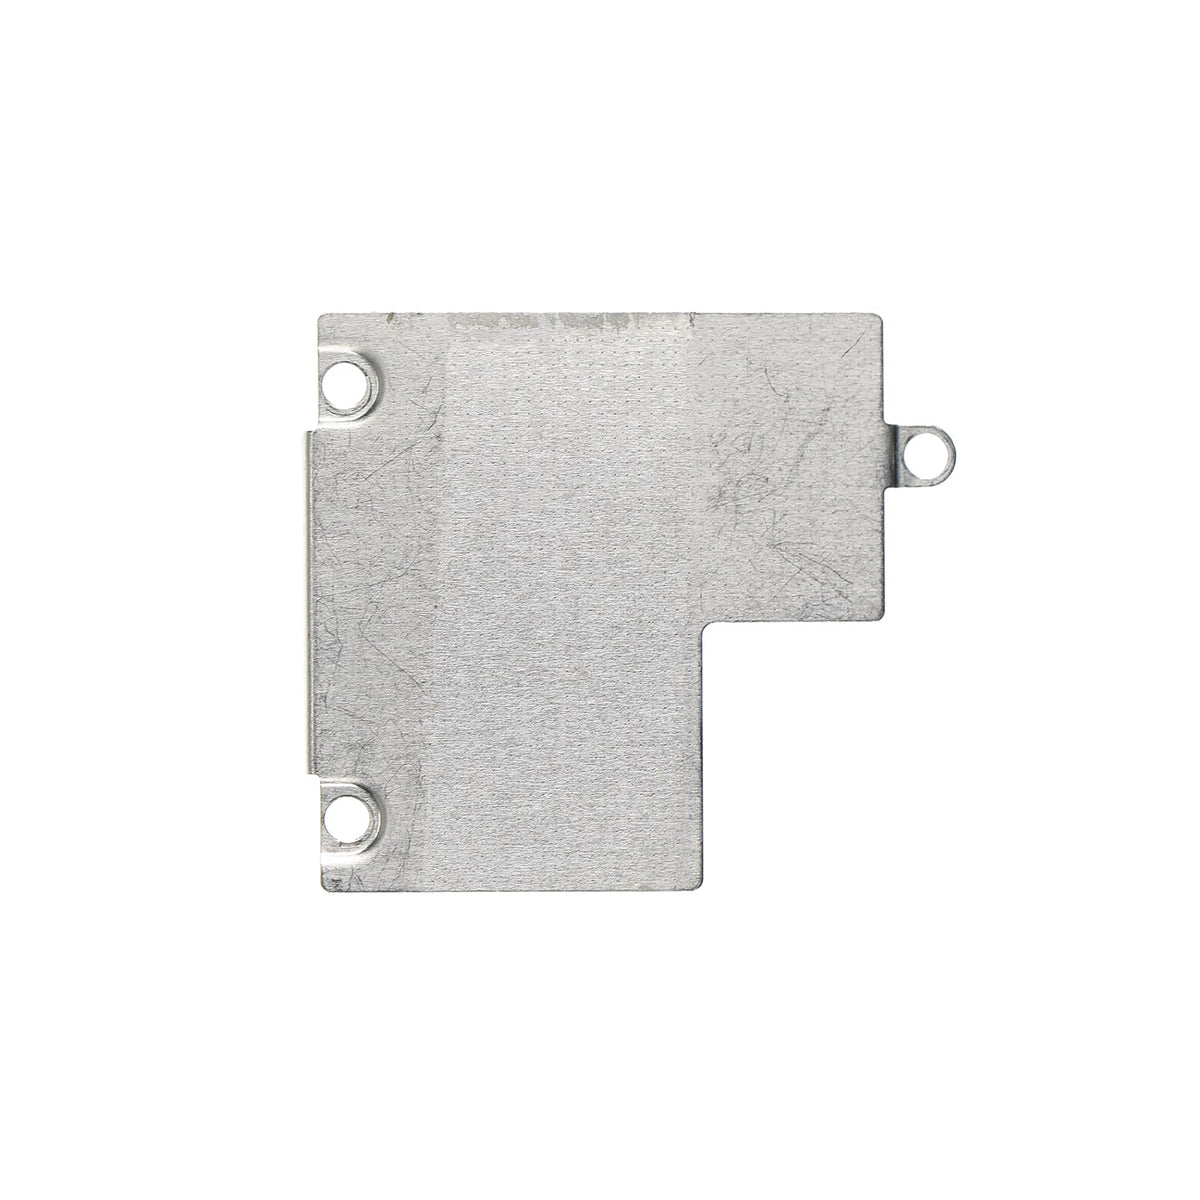 LCD PCB CONNECTOR RETAINING BRACKET FOR IPAD 5